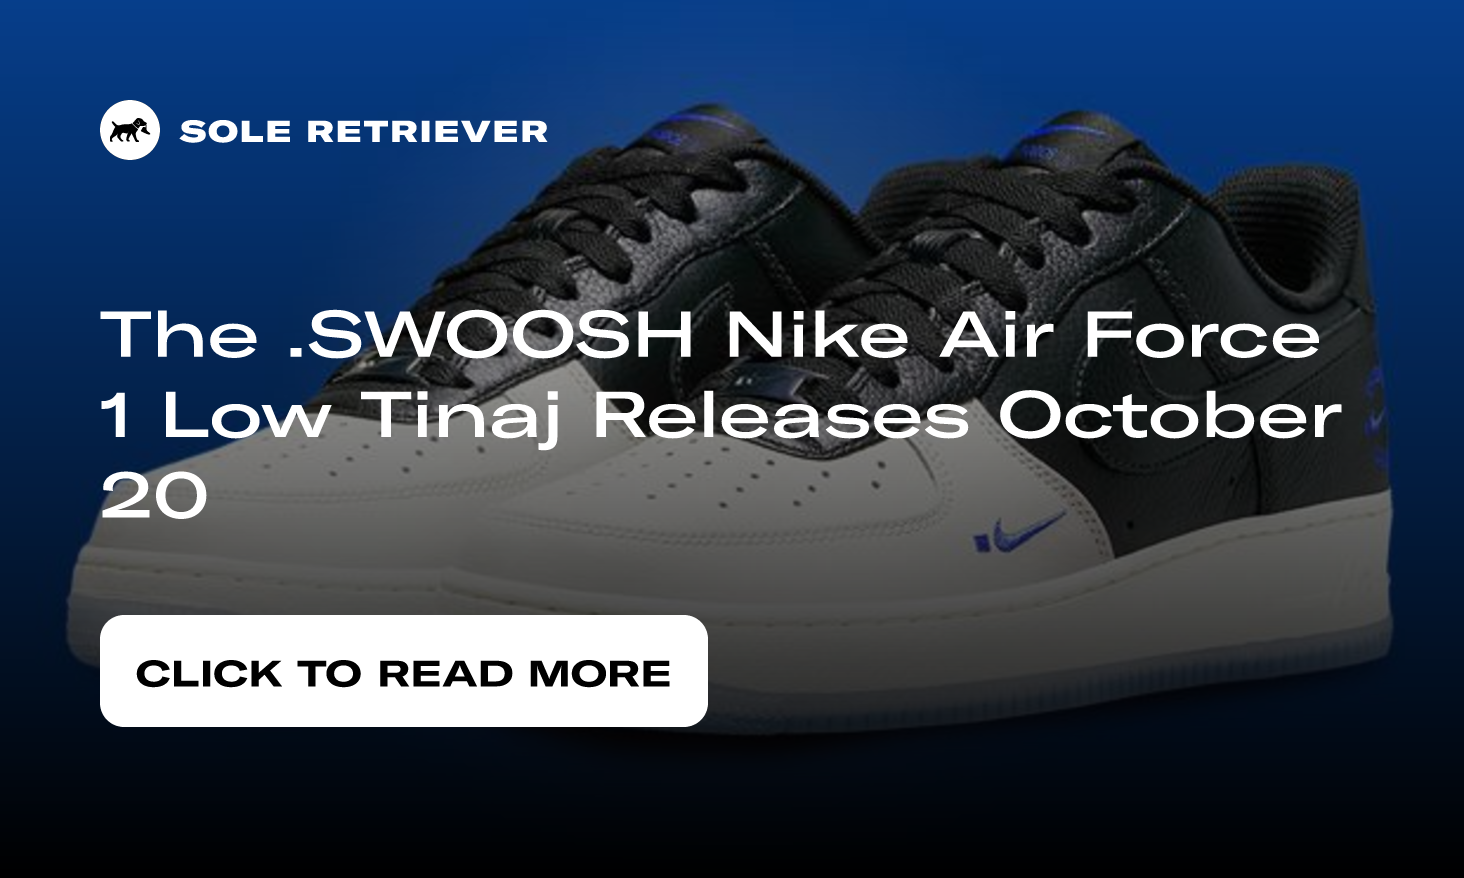 Official Images // Nike Air Force 1 Low “Inspected By Swoosh”